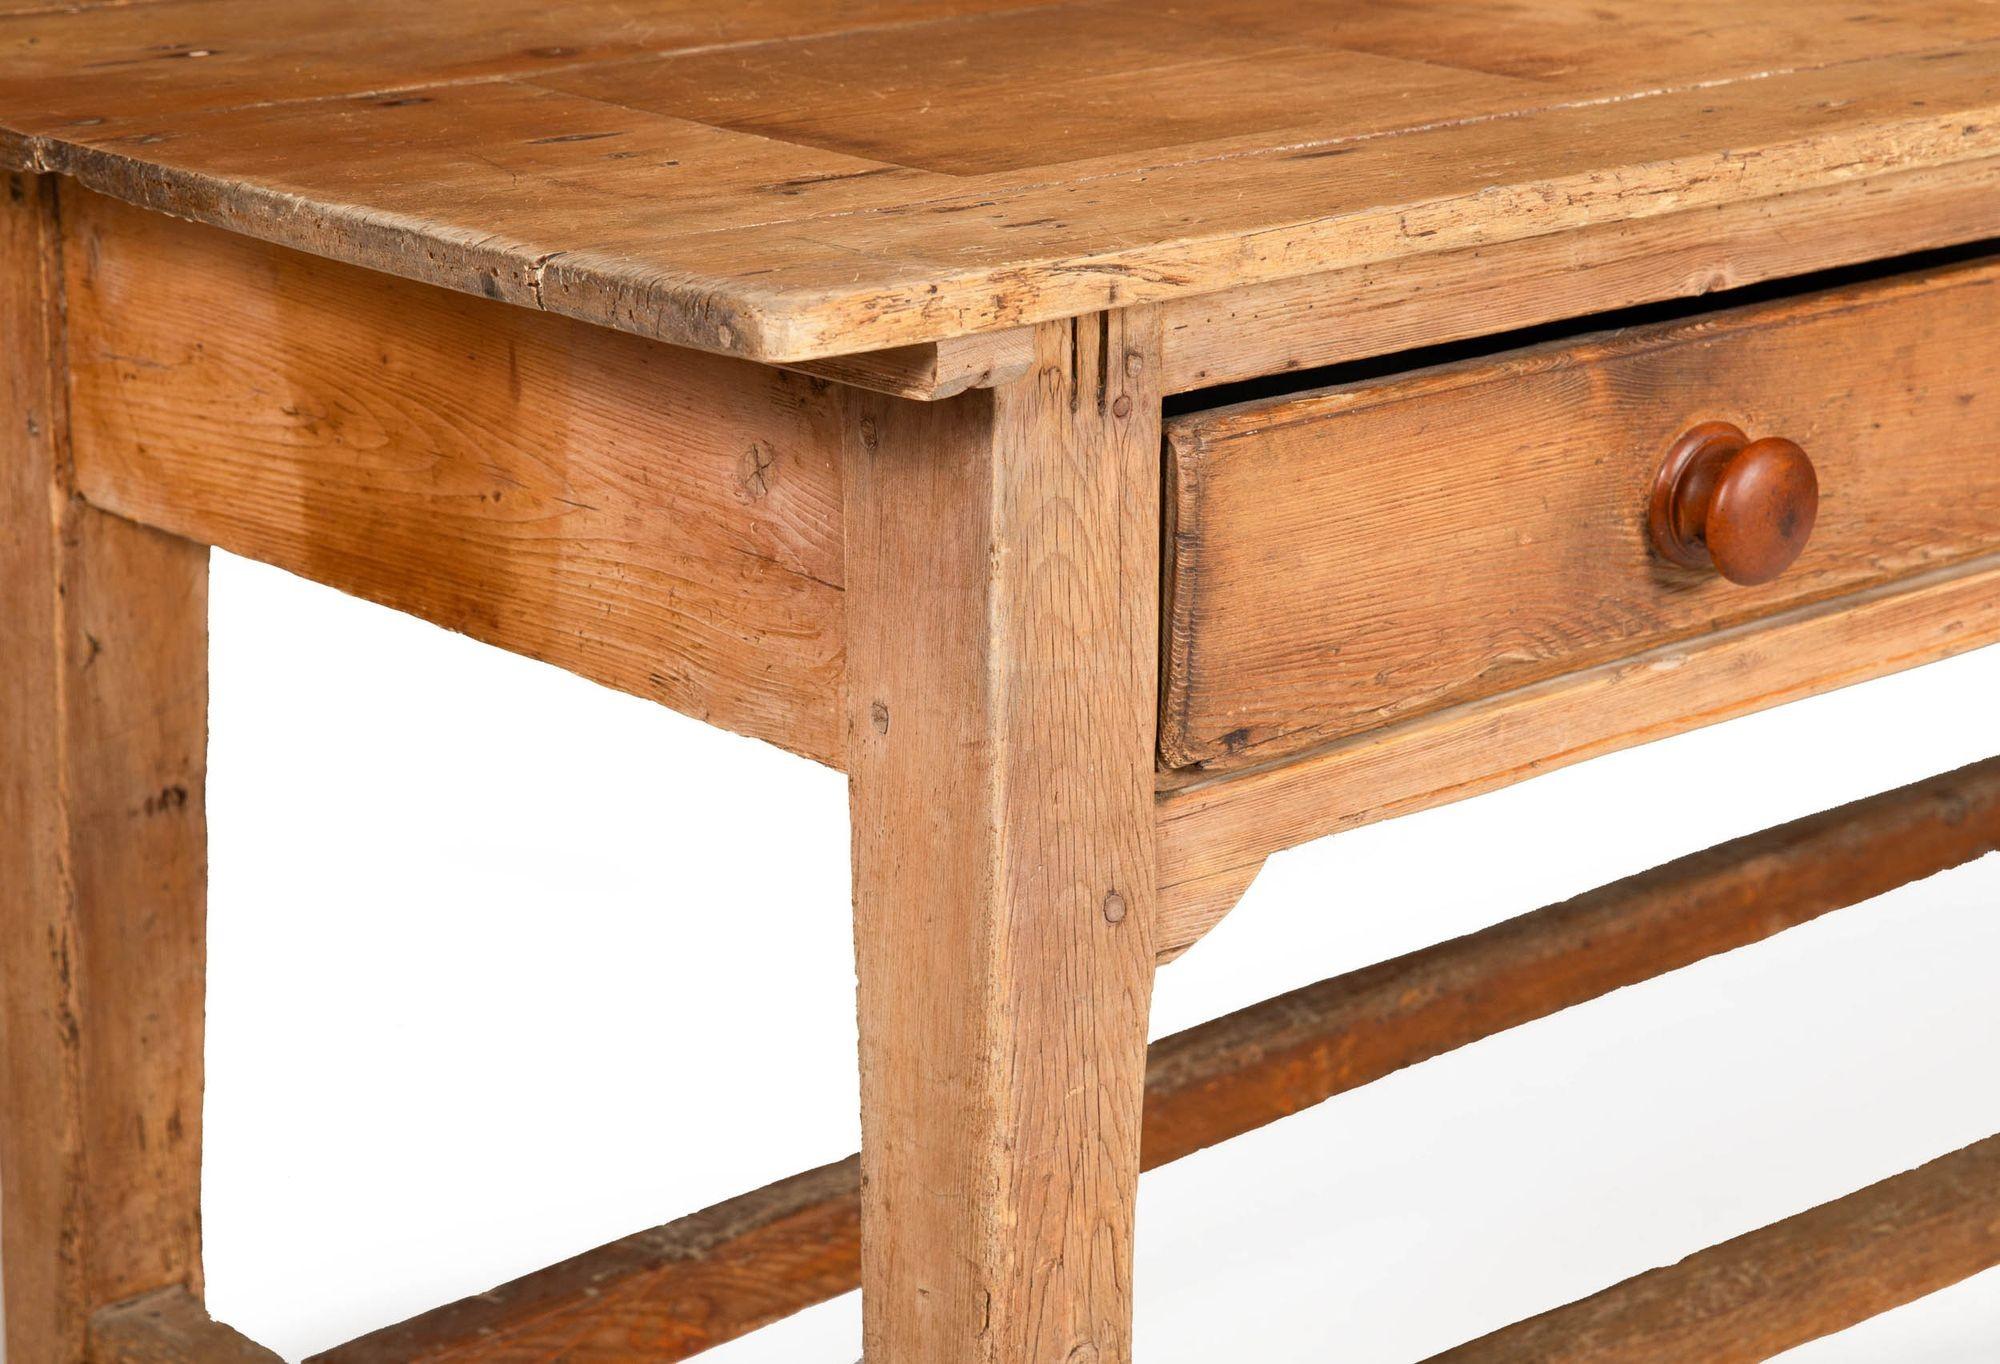 Worn and Patinated English Antique Pine Tavern Table Desk For Sale 8